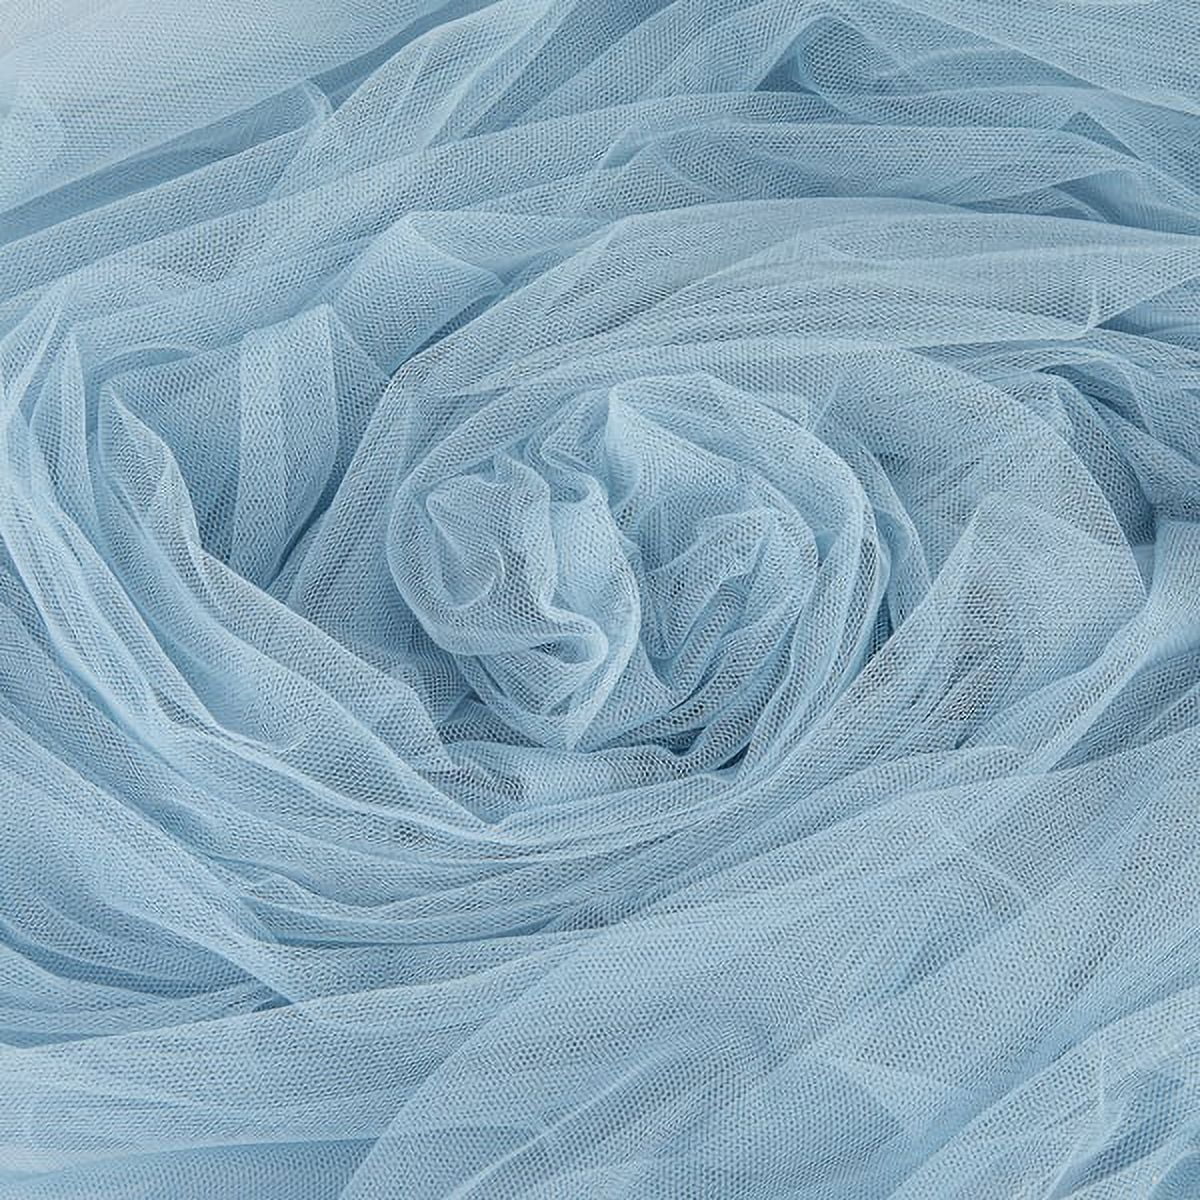 1 Pc, Soft Tulle Fabric Roll 54 x 40 Yds - Dusty Blue for Wedding, Baby  Shower, Anniversary, or Birthday Party